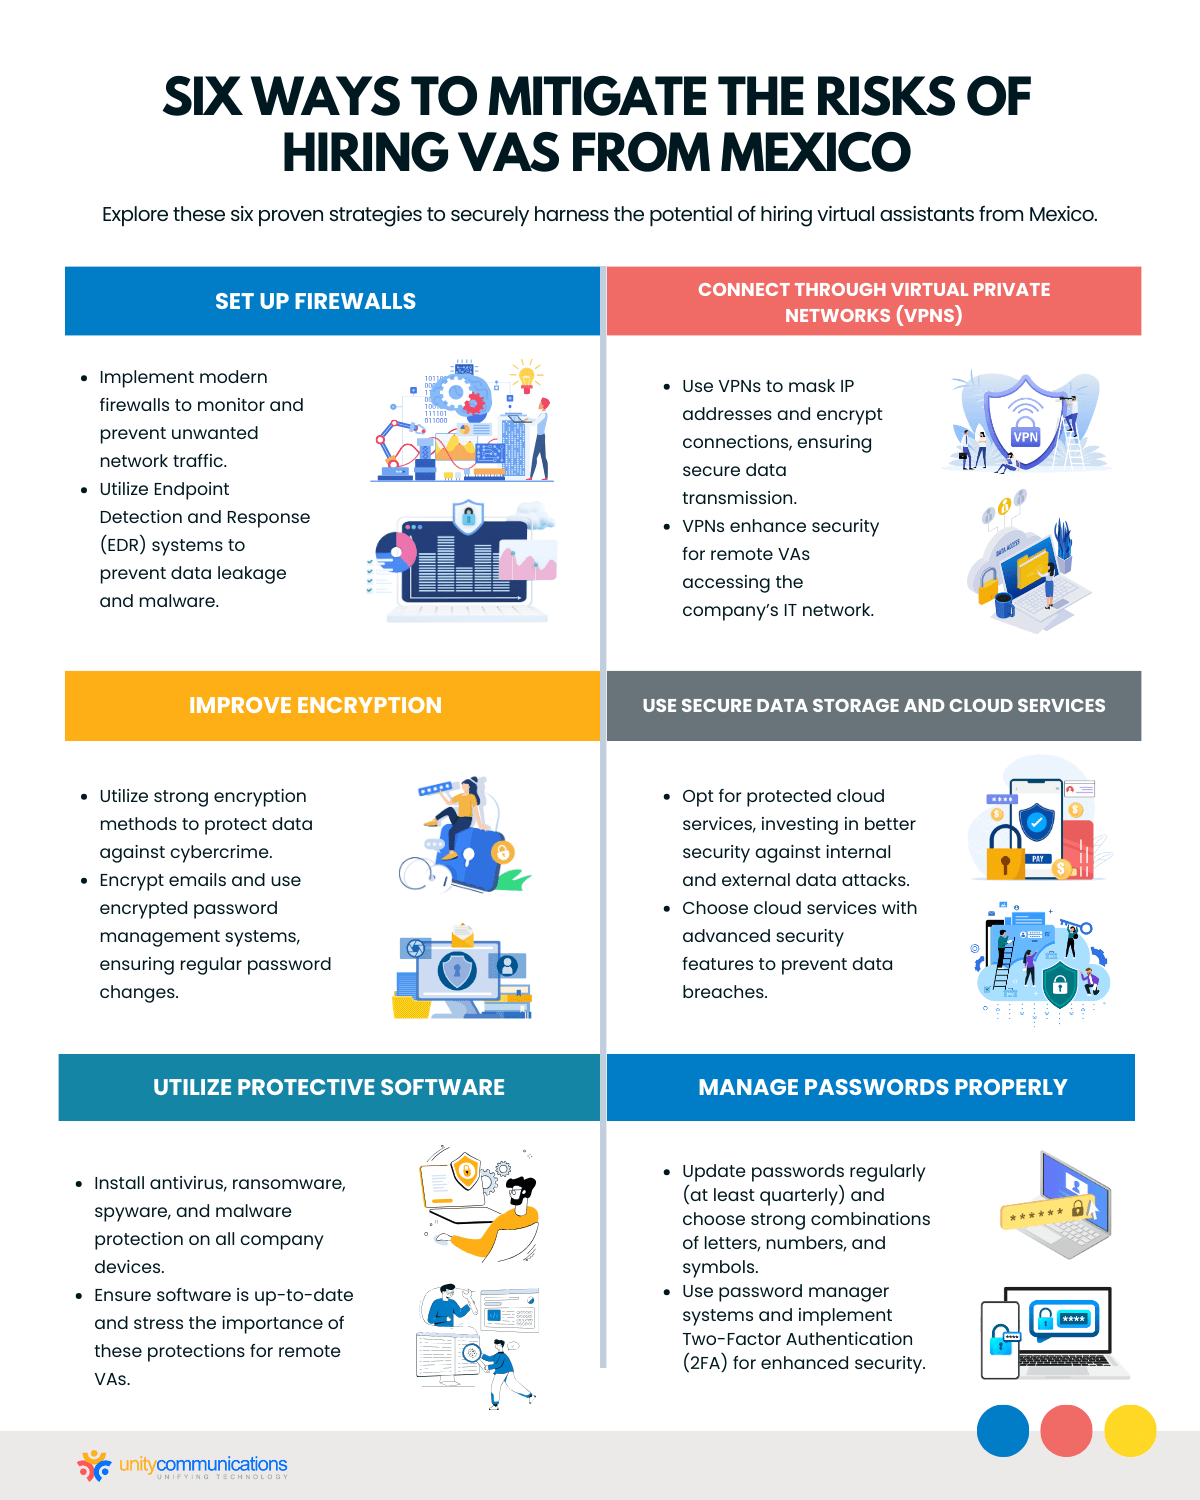 Six Ways to Mitigate the Risks of Hiring VAs from Mexico